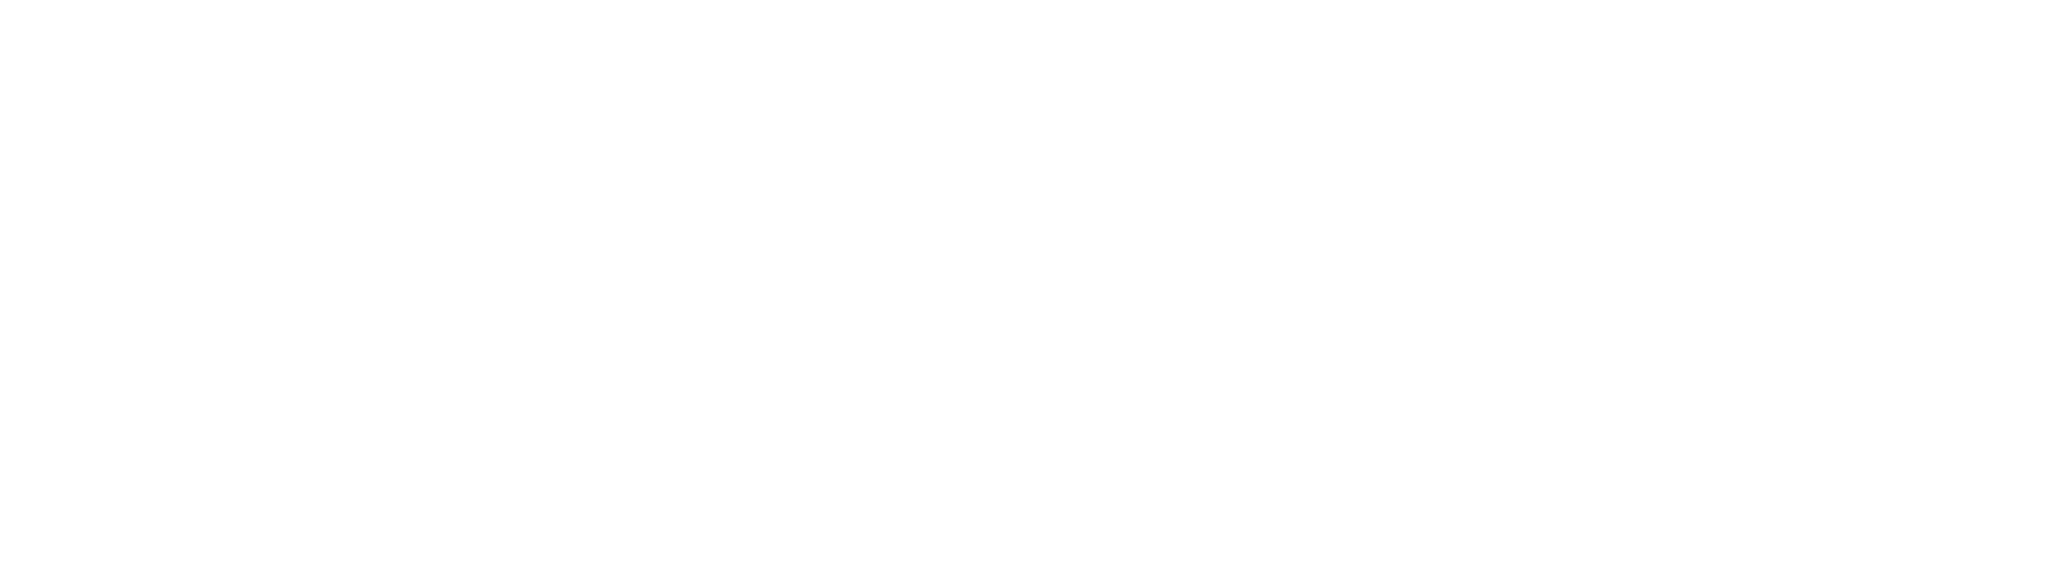 chillingcampeeps